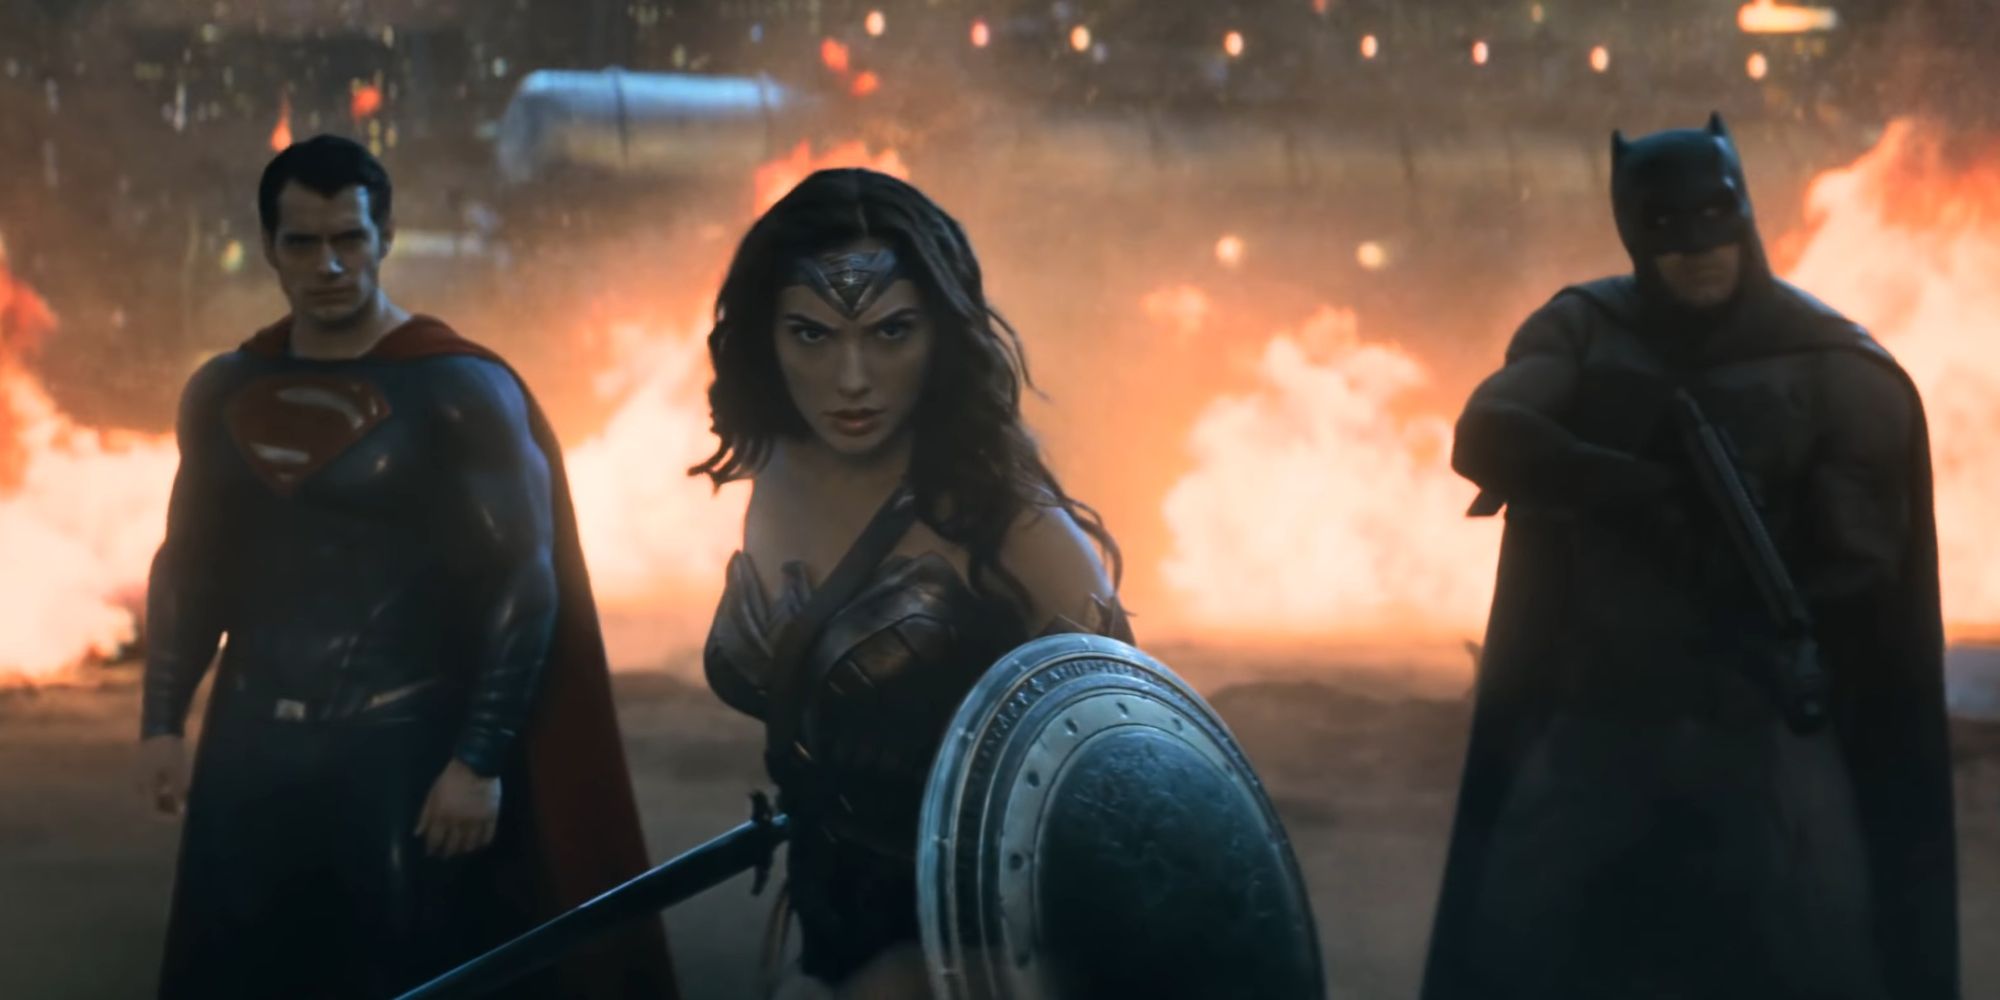 Superman, Wonder Woman, and Batman together as the Trinity in Batman V Superman Dawn Of Justice (2016)